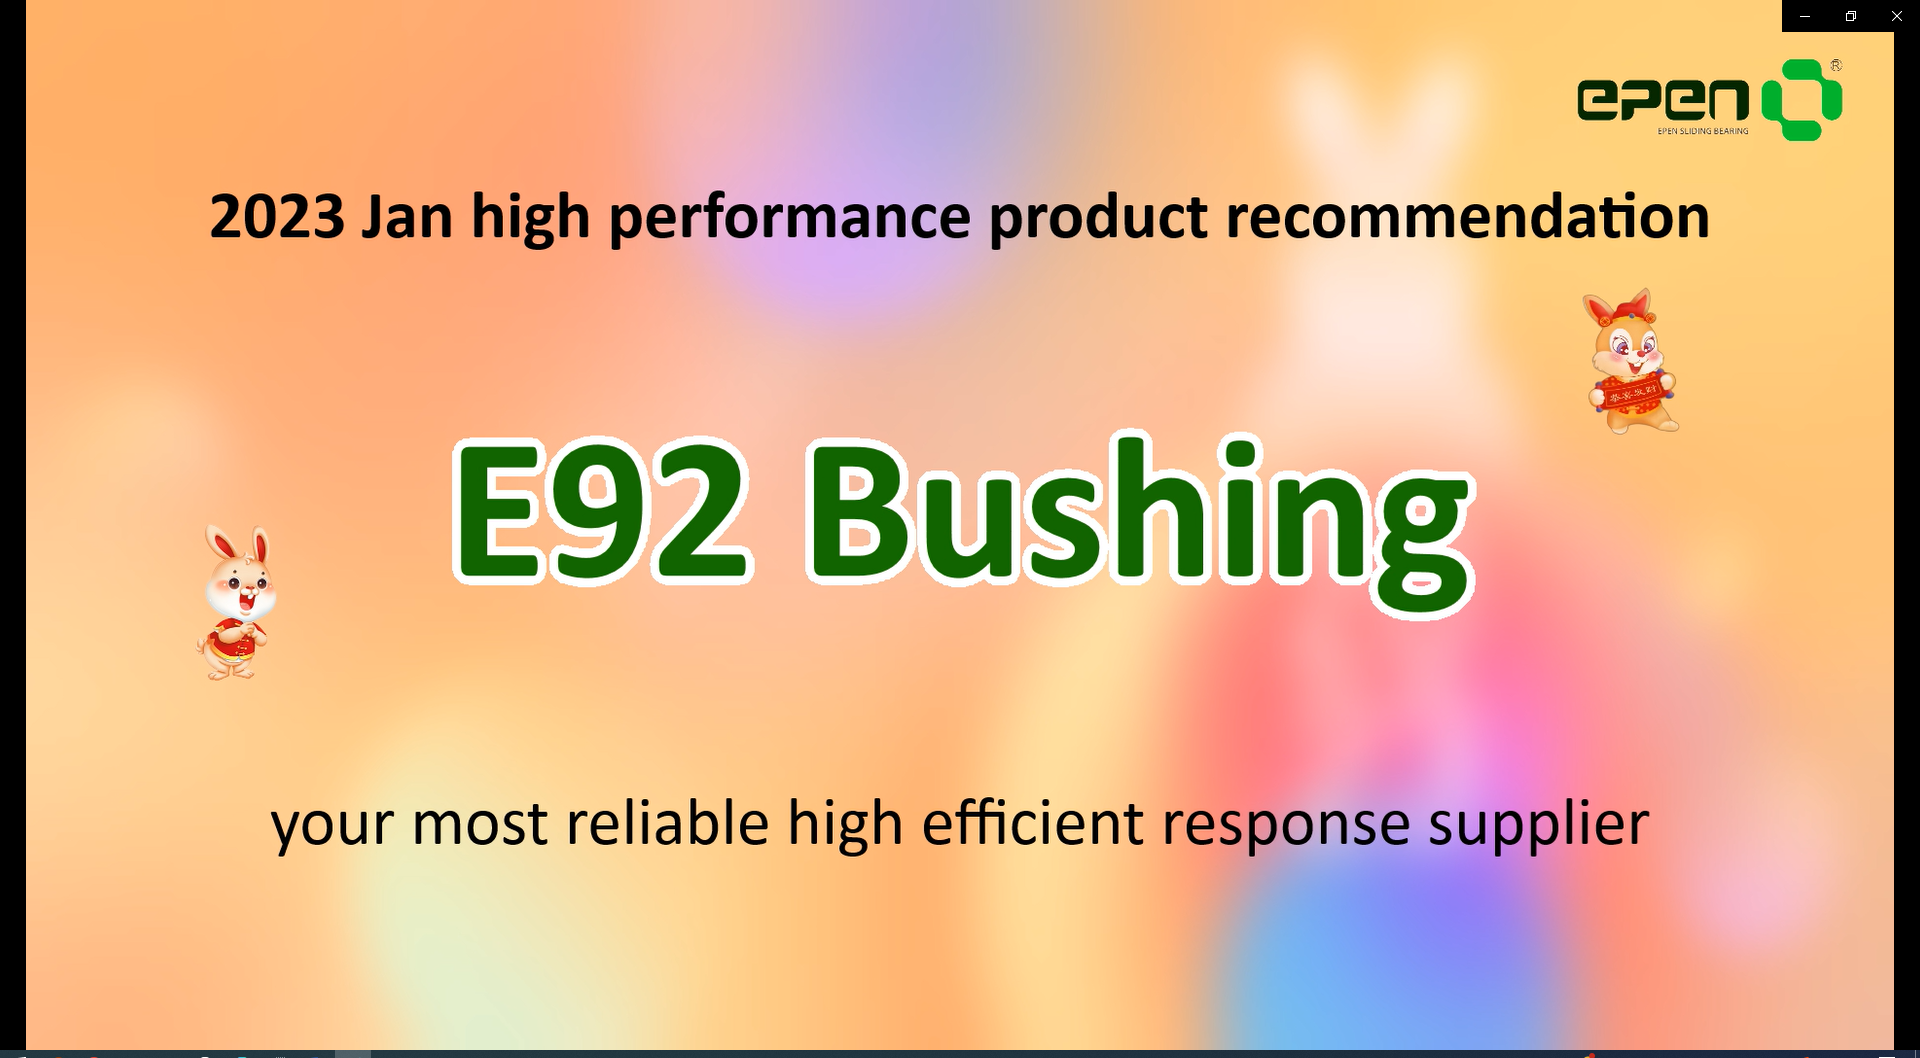 2023 January High Performance Product Recommendation-E92 Bushing from Epen